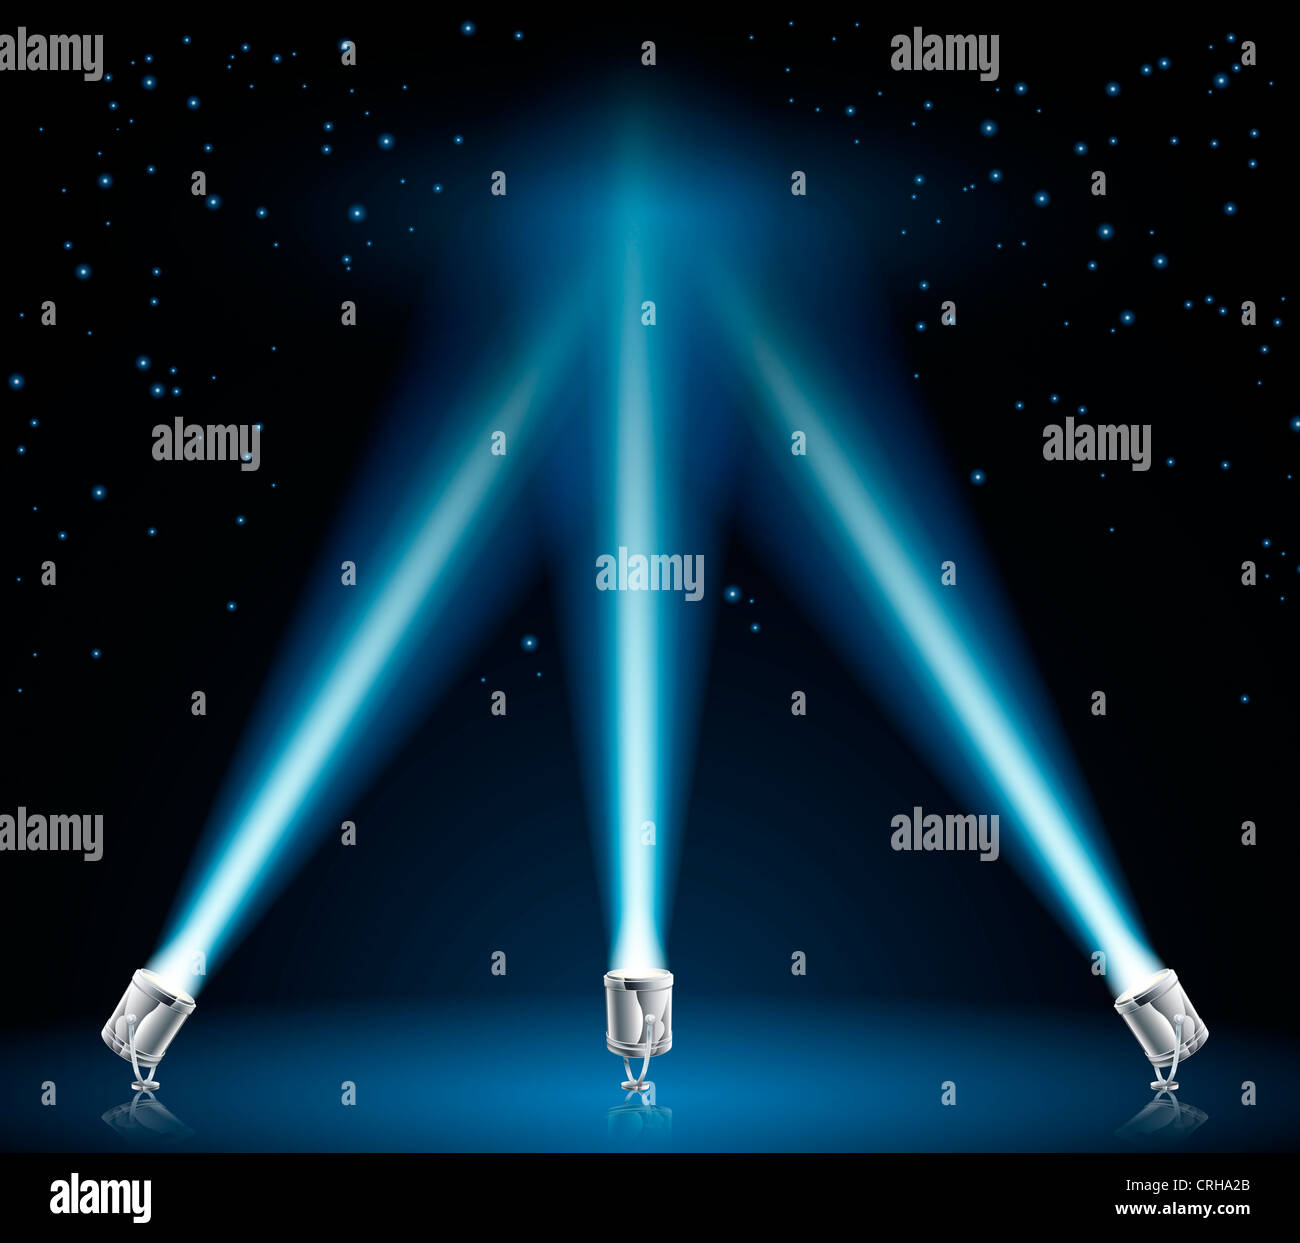 Illustration of searchlights or spotlights pointing into the night sky Stock Photo